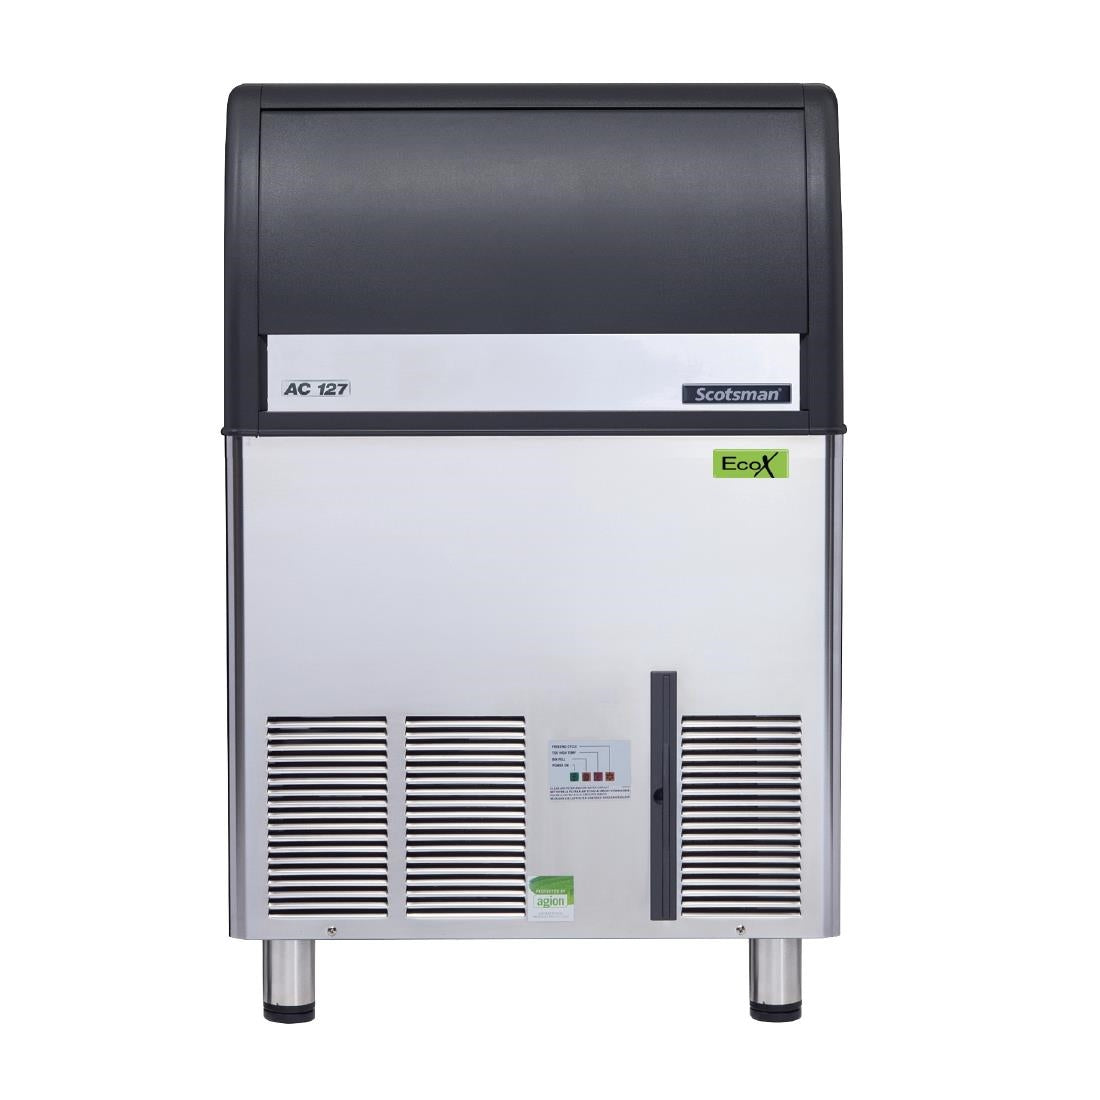 HR284 Scotsman Self Contained Ice Cuber AC172 75kg Output